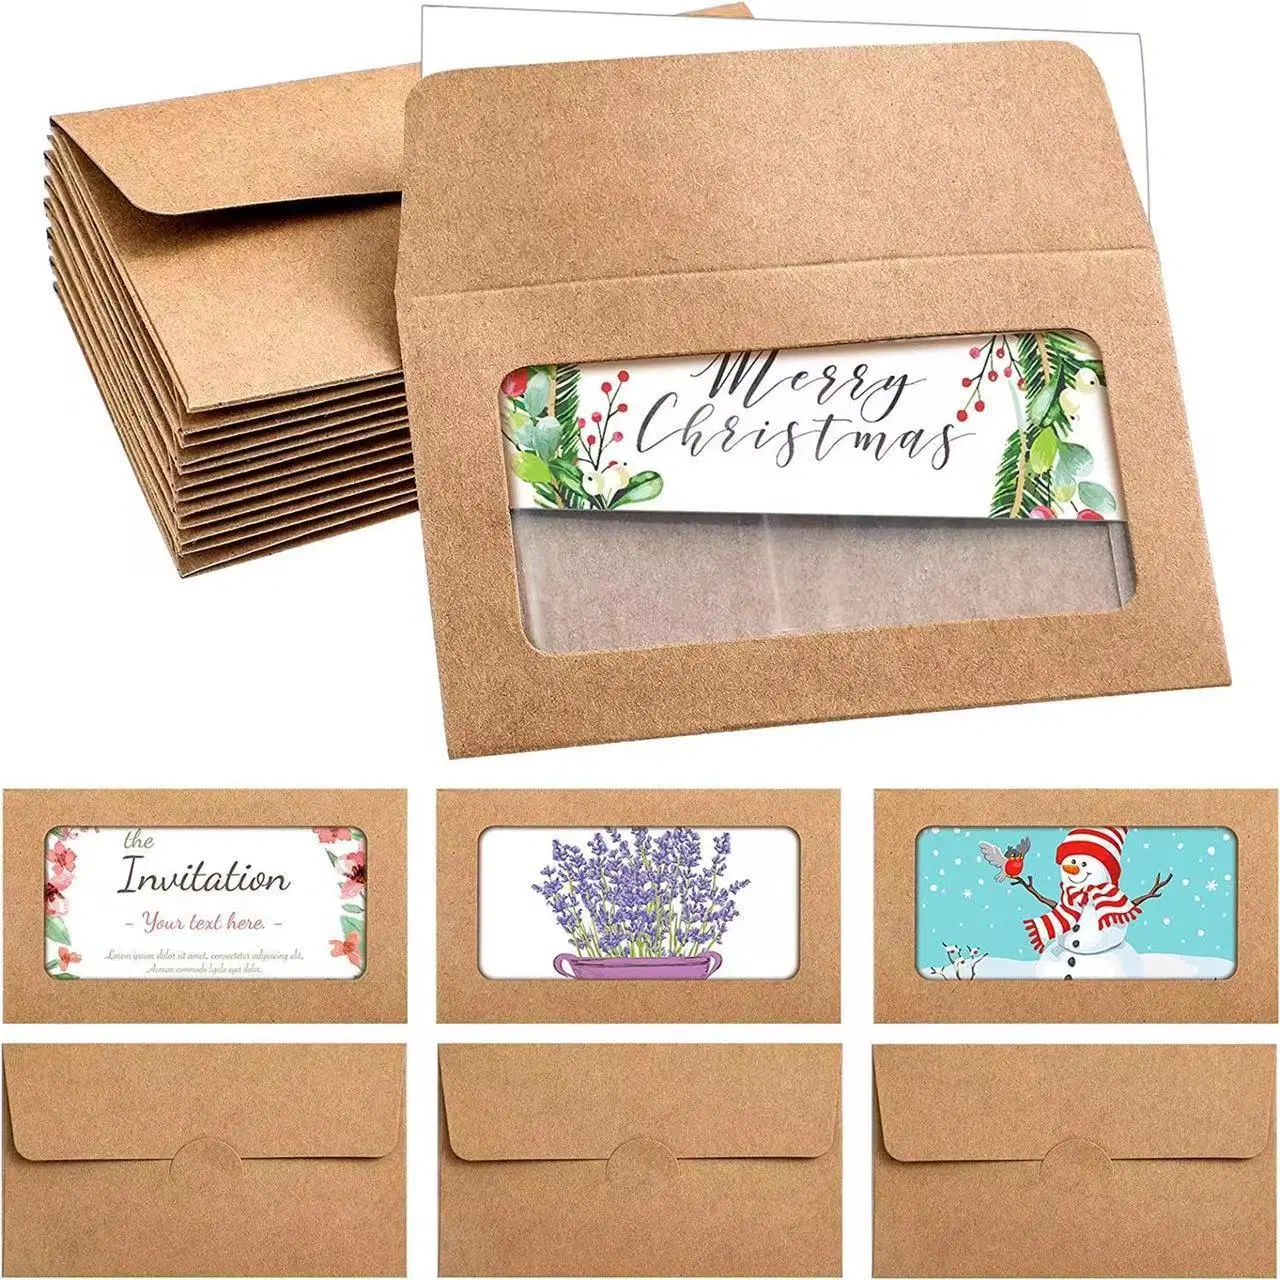 Custom Craft Card Envelopes with Windows for Business Presentation and Gift Cards